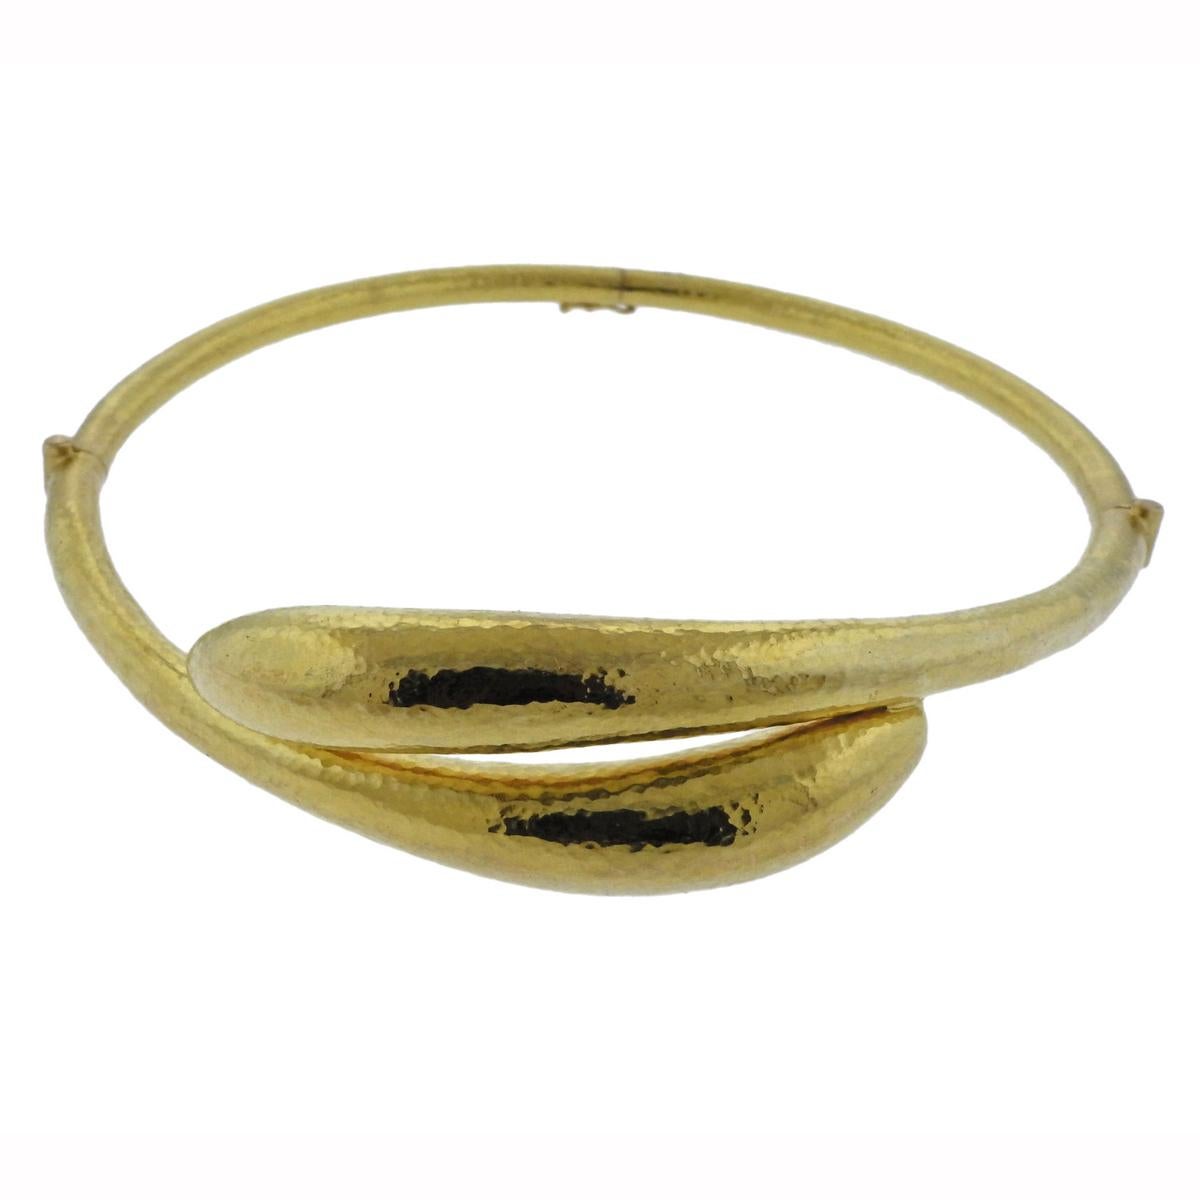 18k yellow hammered gold collar necklace, crafted by Greek designer Ilias Lalaounis. Necklace will comfortably fit an average size neck, approx. 14